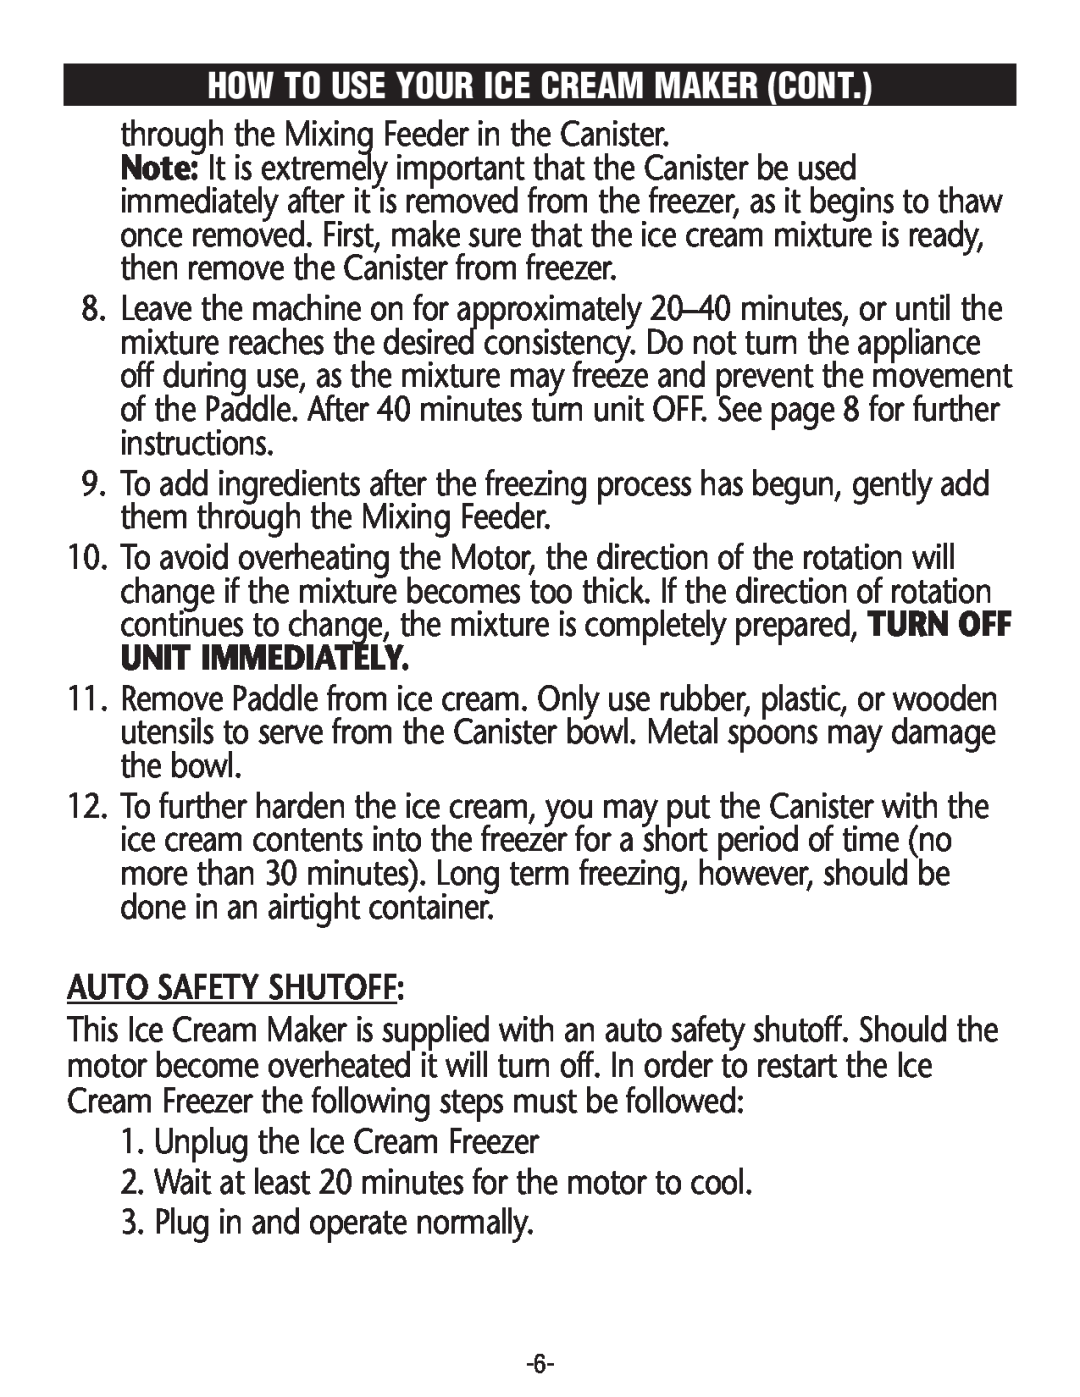 Rival GC8101, GC8151 manual How To Use Your Ice Cream Maker Cont, Unit Immediately, Auto Safety Shutoff 